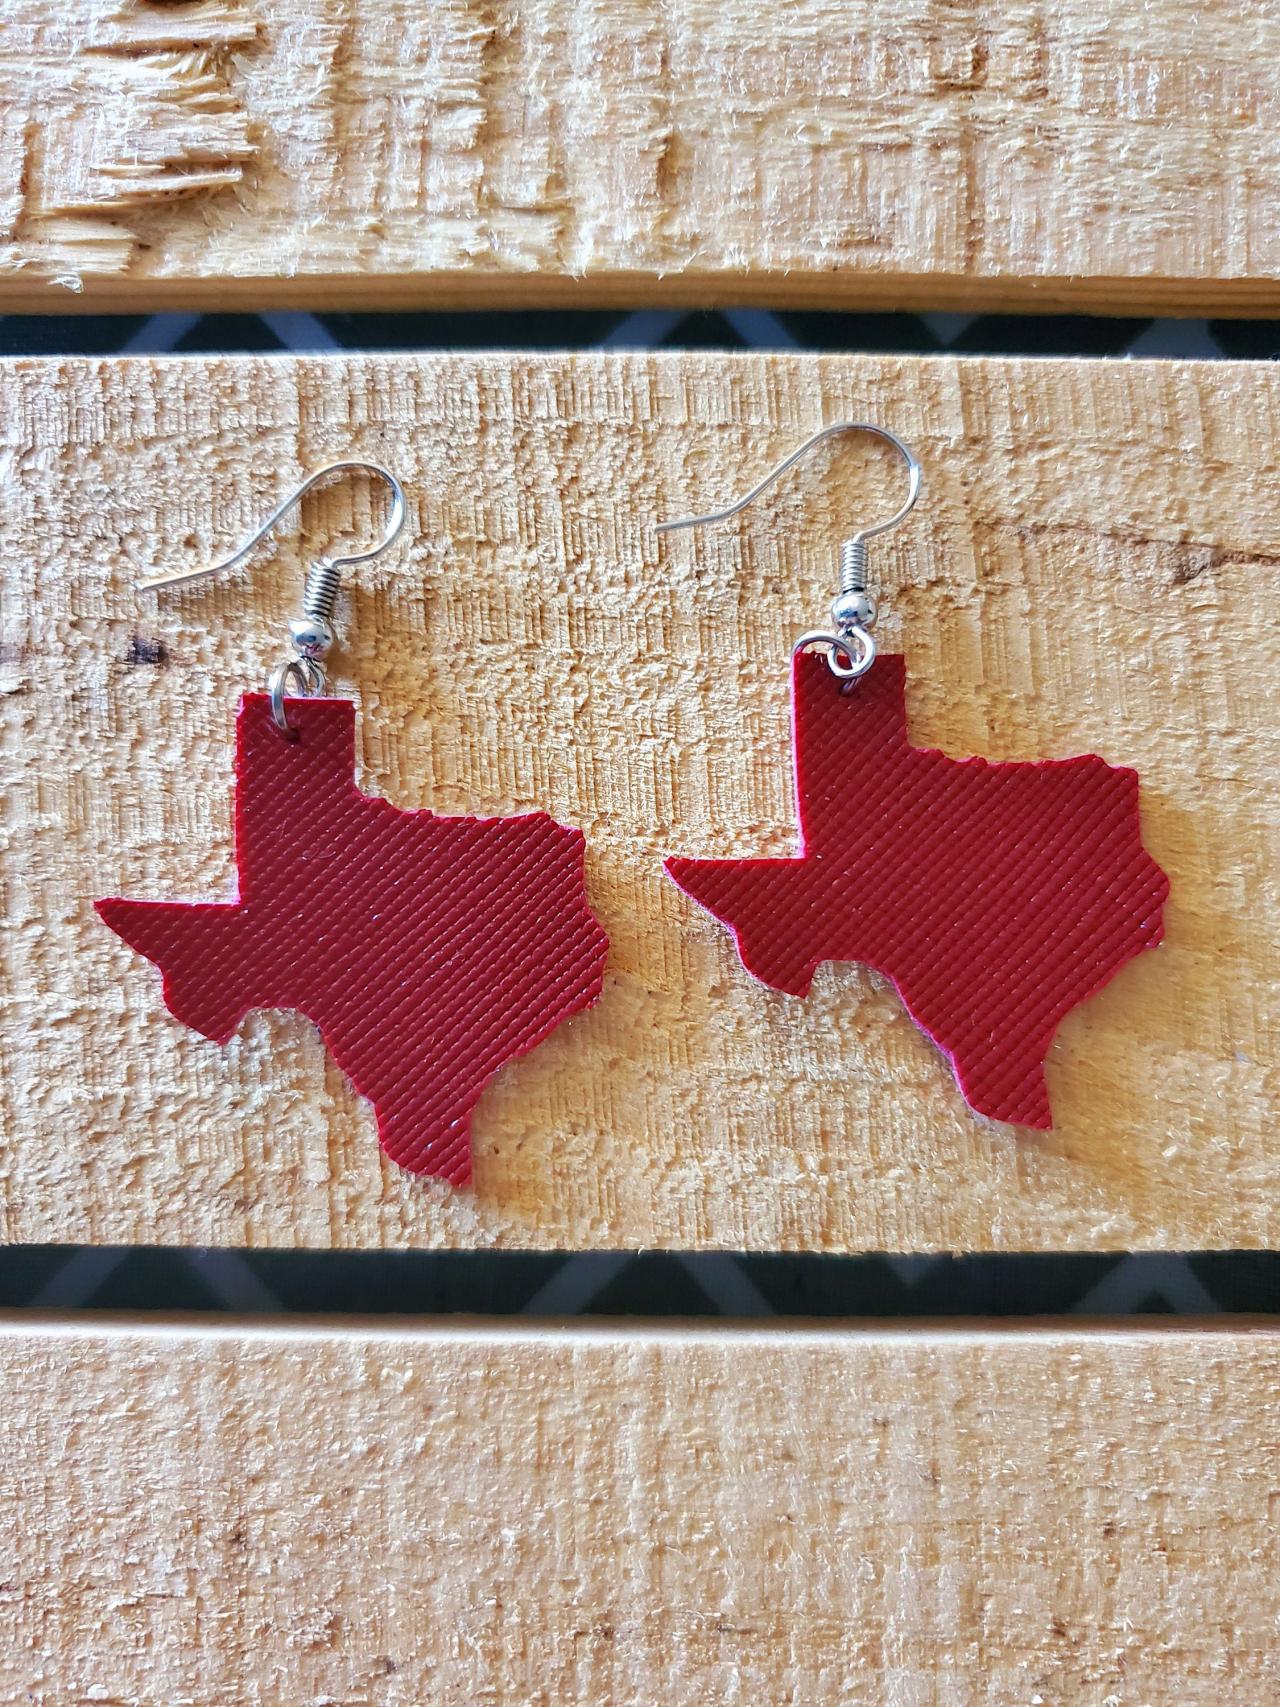 State Of Texas Leather Earrings, Lone Star State Jewelry, Maroon Leather Earrings, Maroon Texas Jewelry, Dainty Earrings, Small Earrings